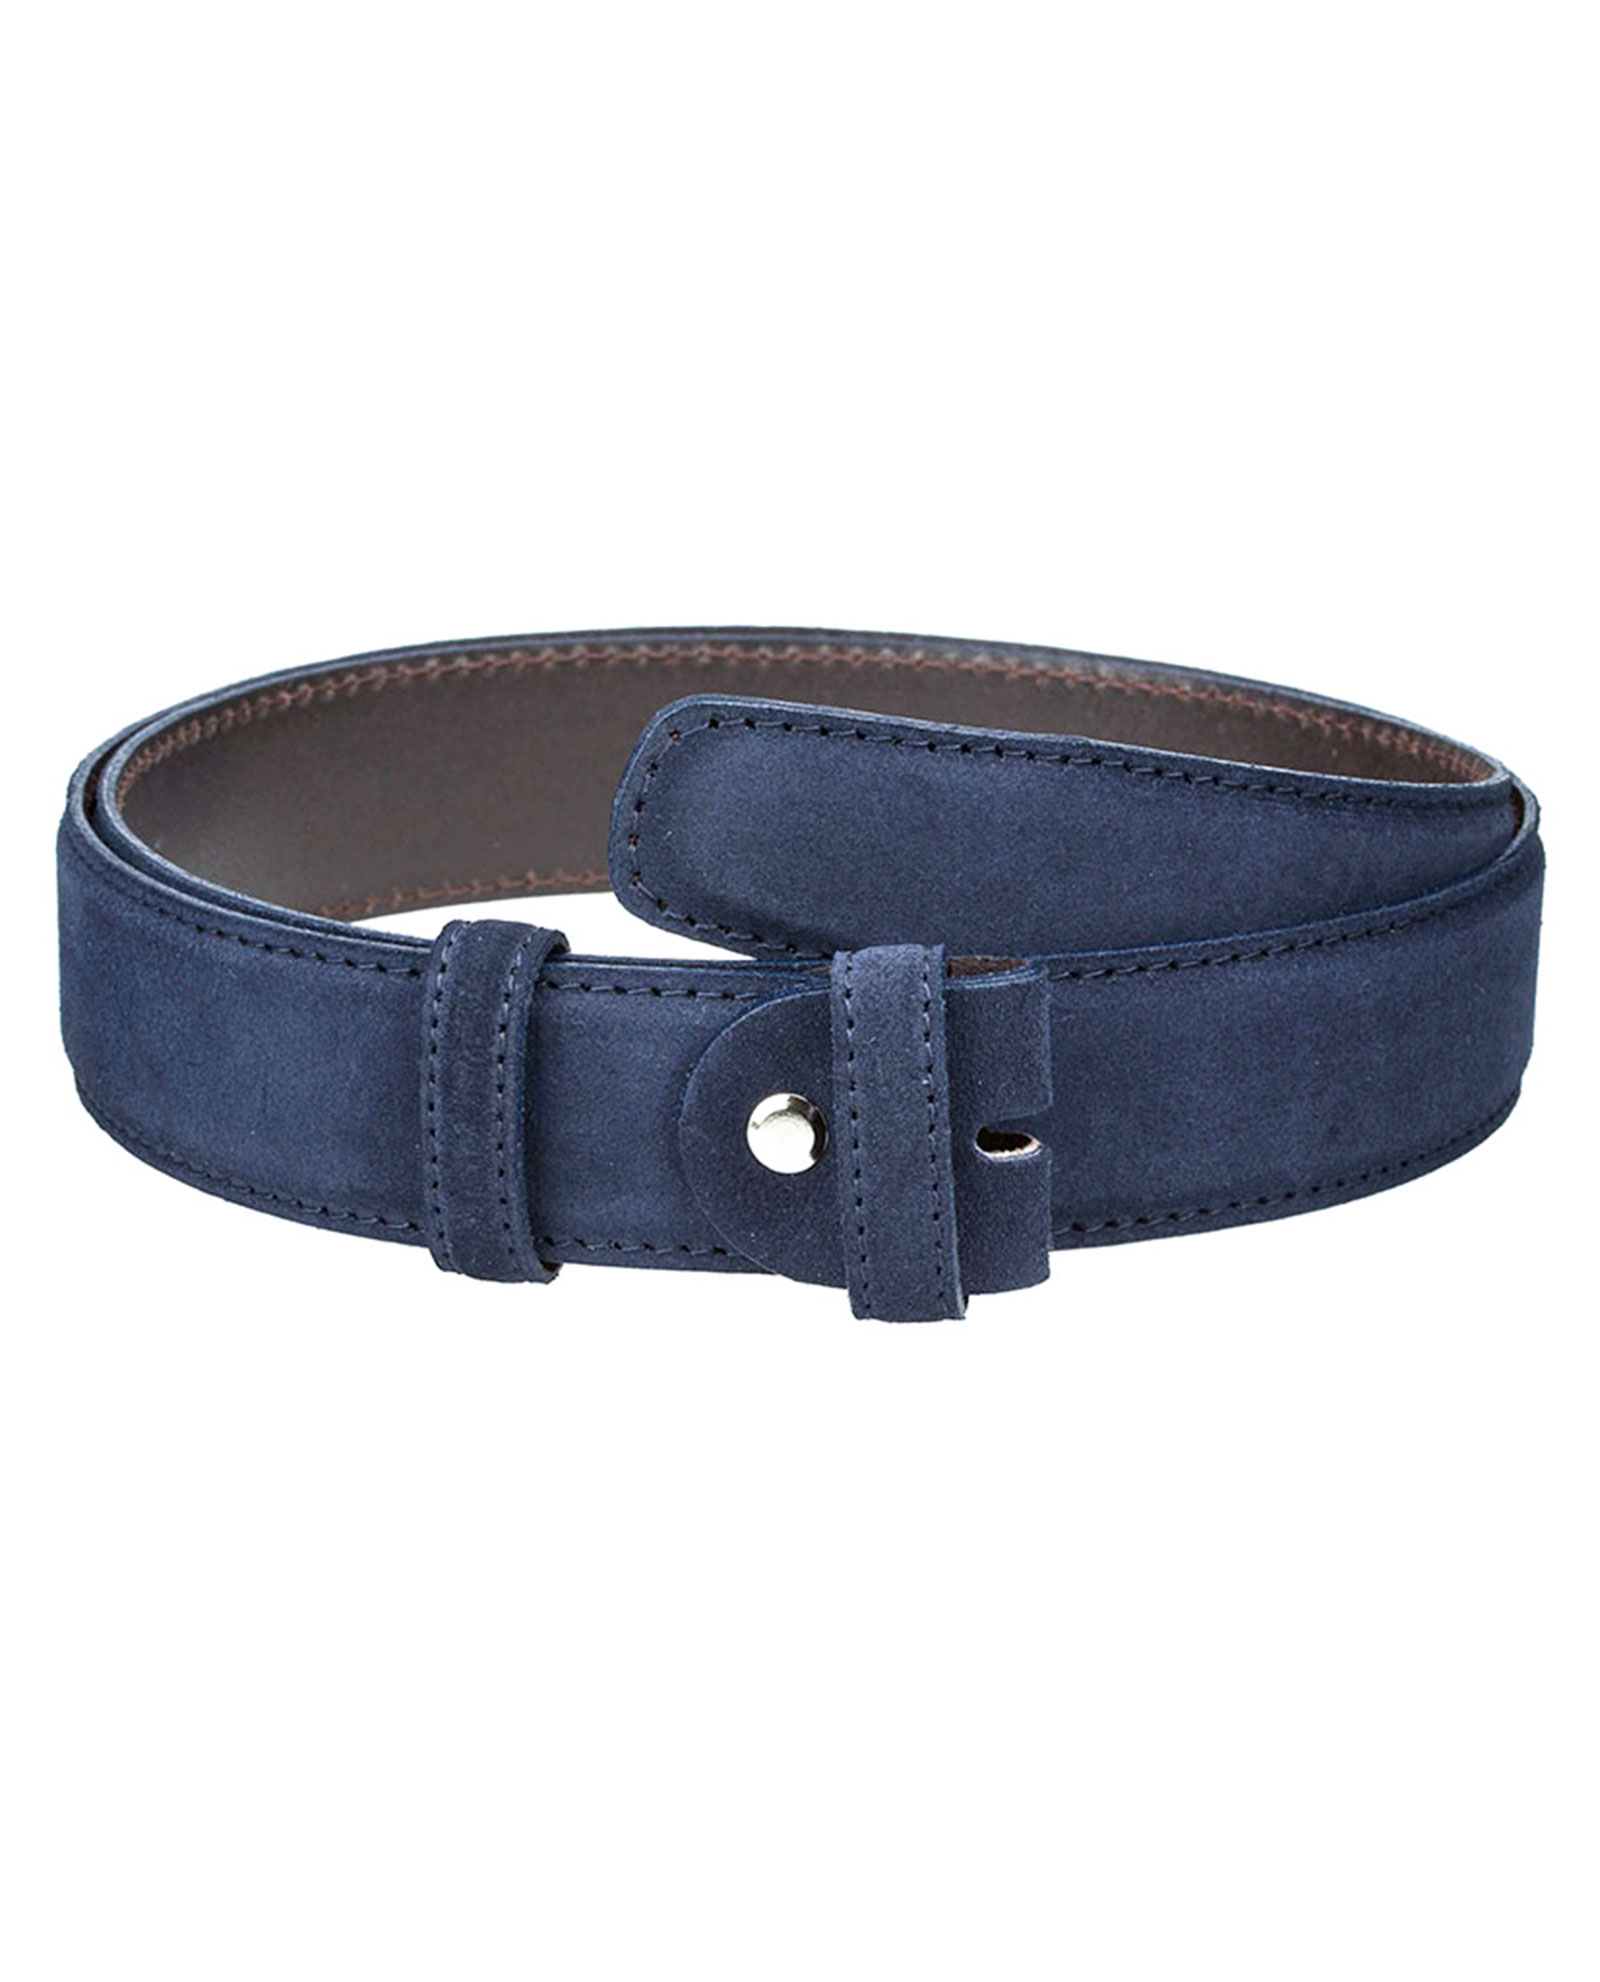 Buy Navy Suede Belt Strap - 35 mm Replacement Leather - Free Shipping